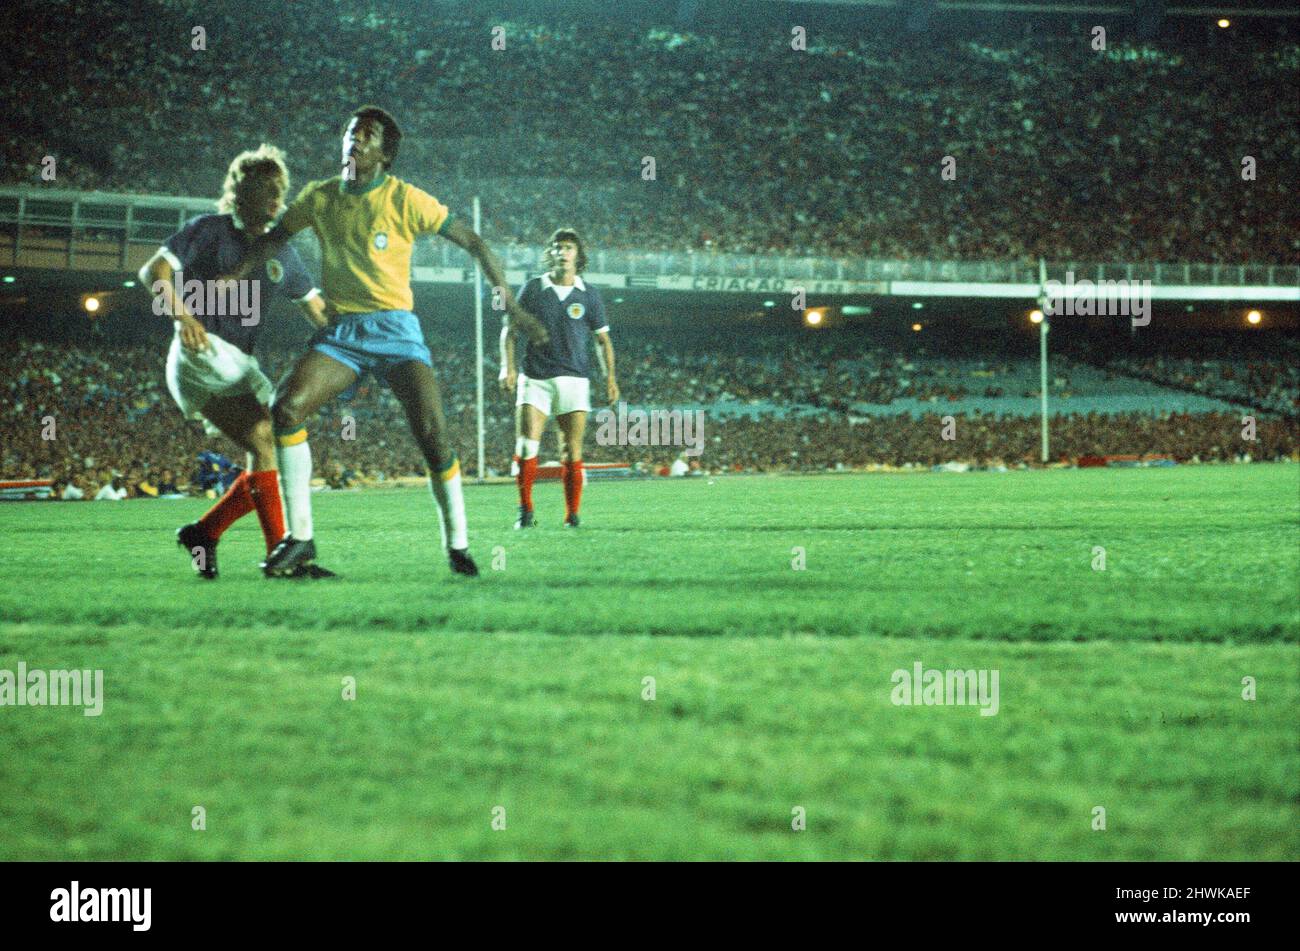 Brazil 1-0 Scotland, 1972 Brazil Independence Cup, final stage, Group A match at the Estadio do Maracana, Rio de Janeiro, Brazil, Wednesday 5th July 1972. Pictured, match action Stock Photo